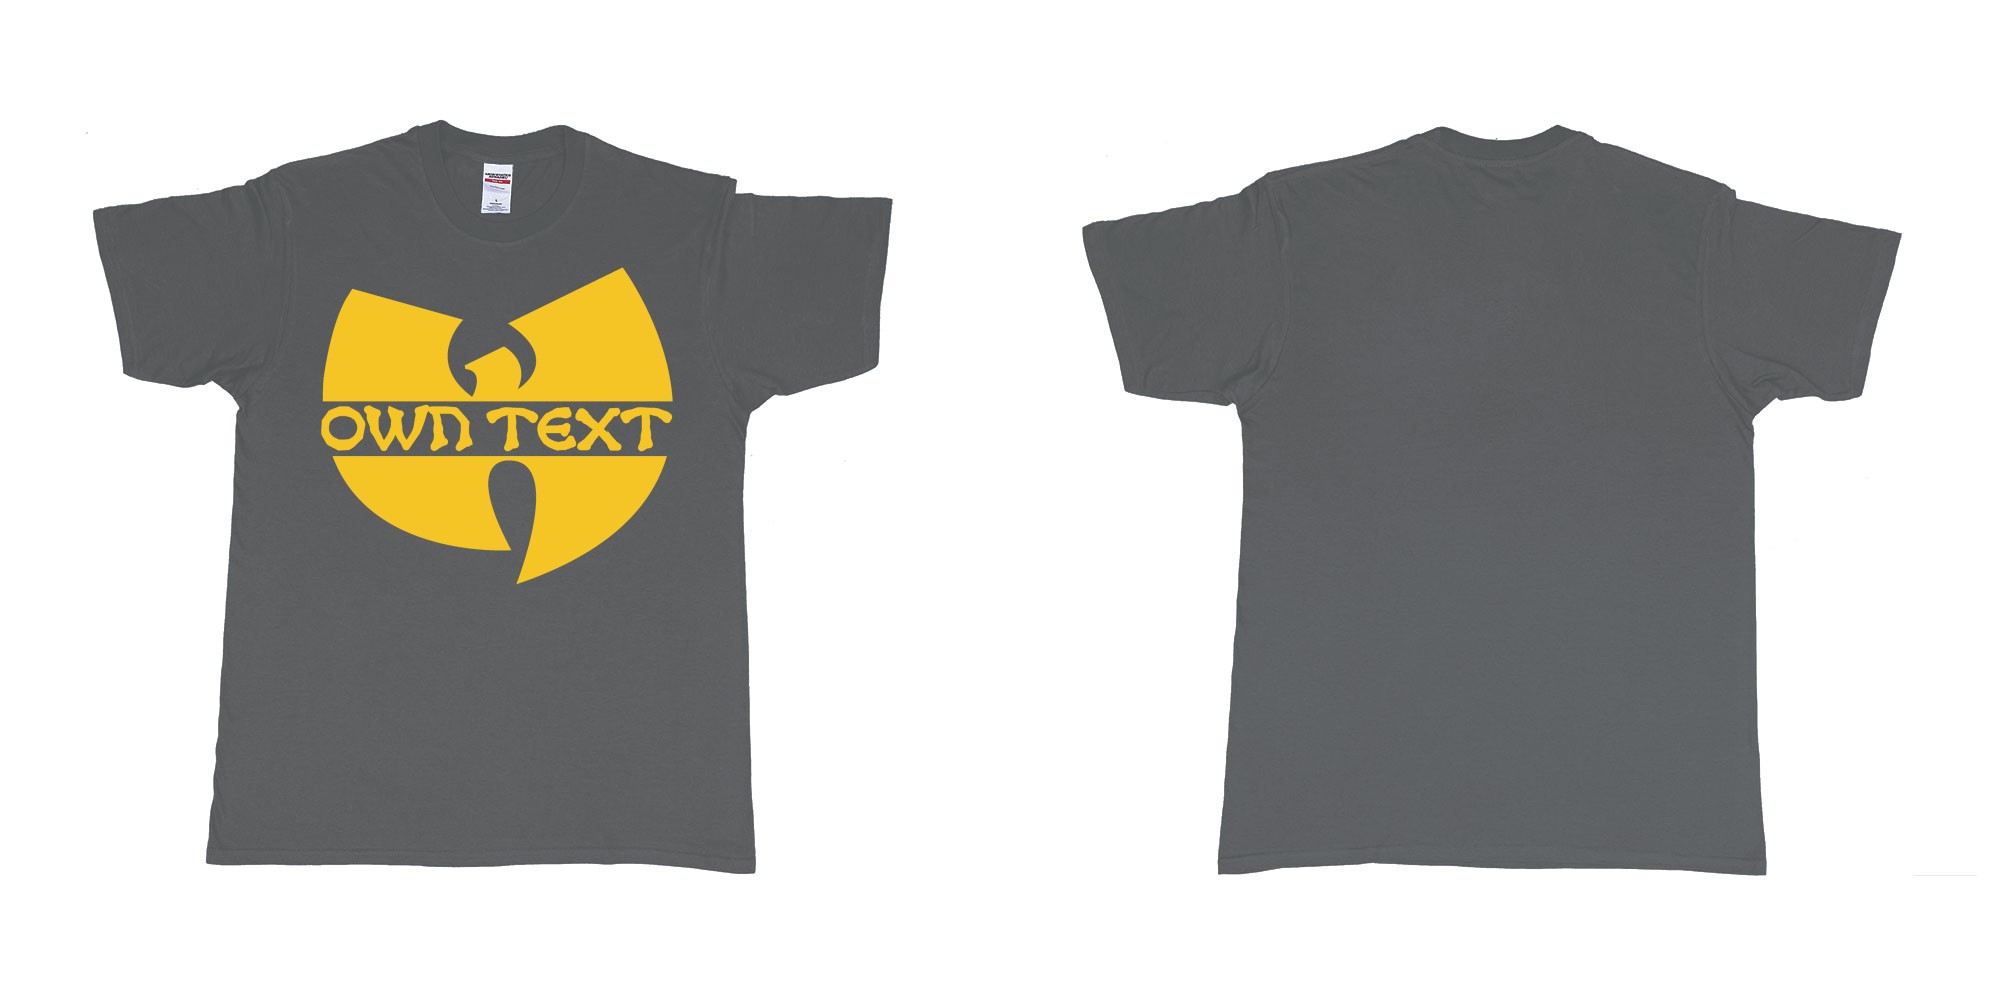 Custom tshirt design wu tang clan logo in fabric color charcoal choice your own text made in Bali by The Pirate Way